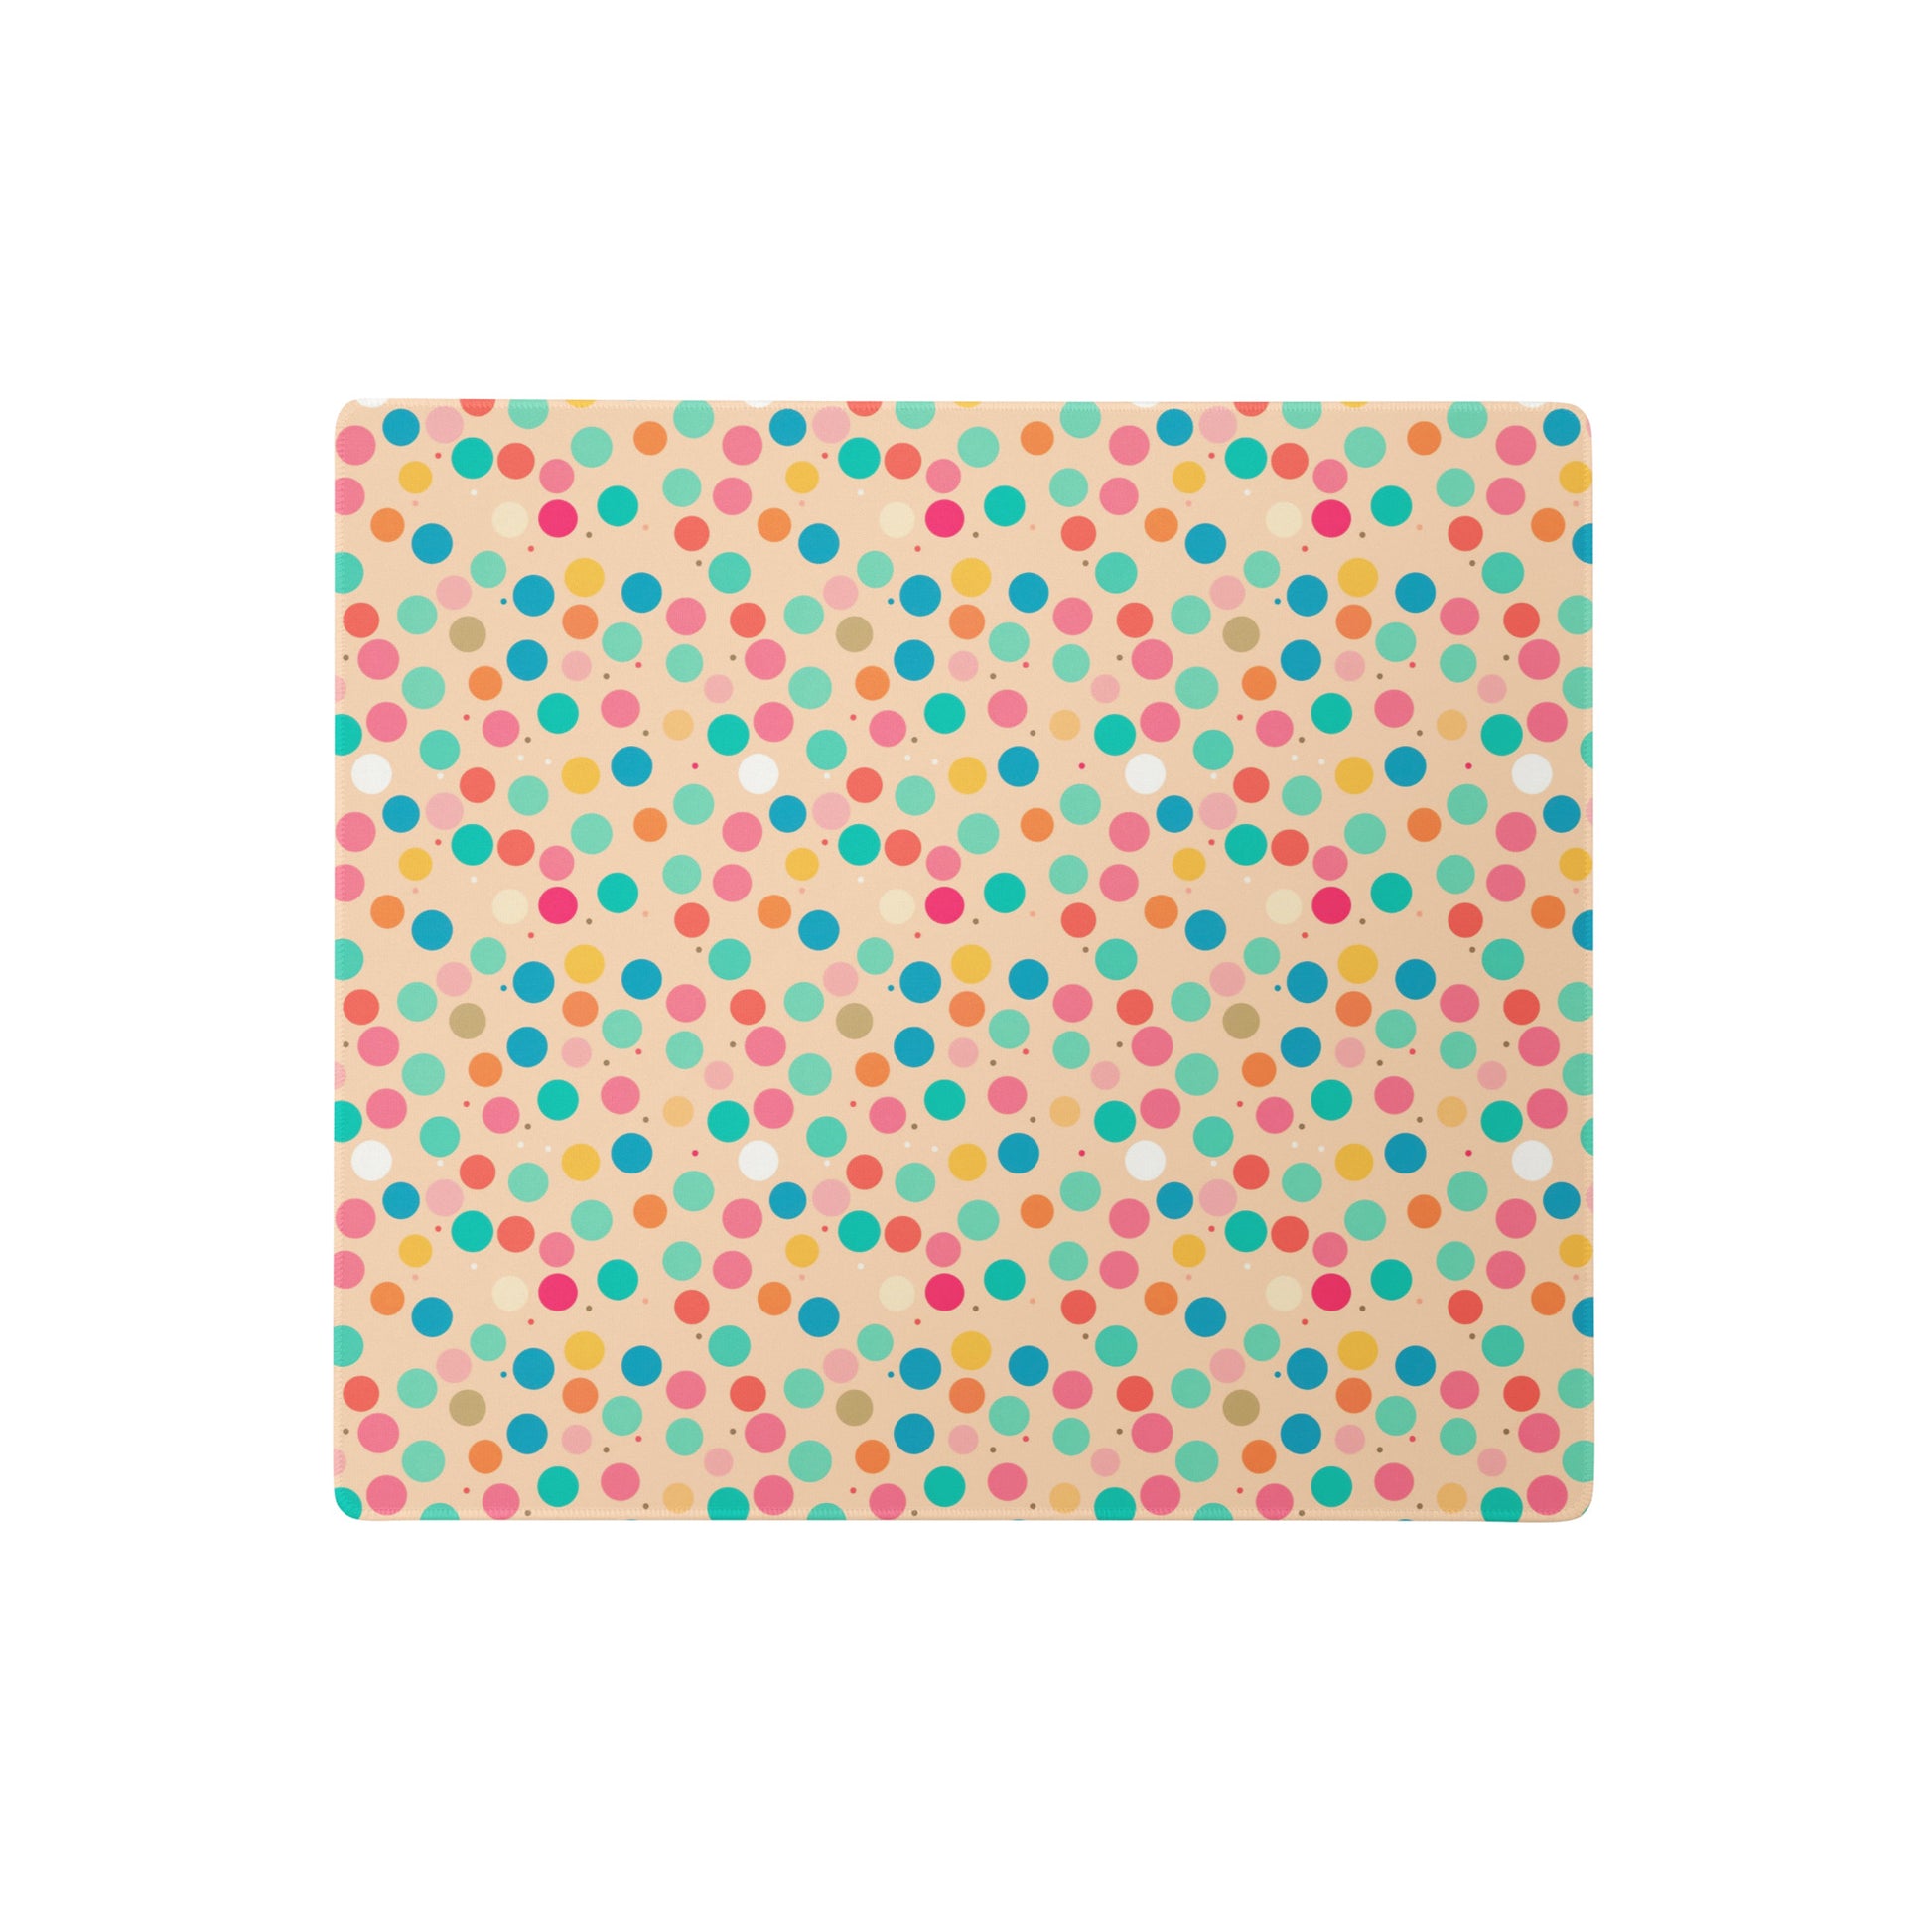 A 18" x 16" desk pad with a colorful polka dot pattern.